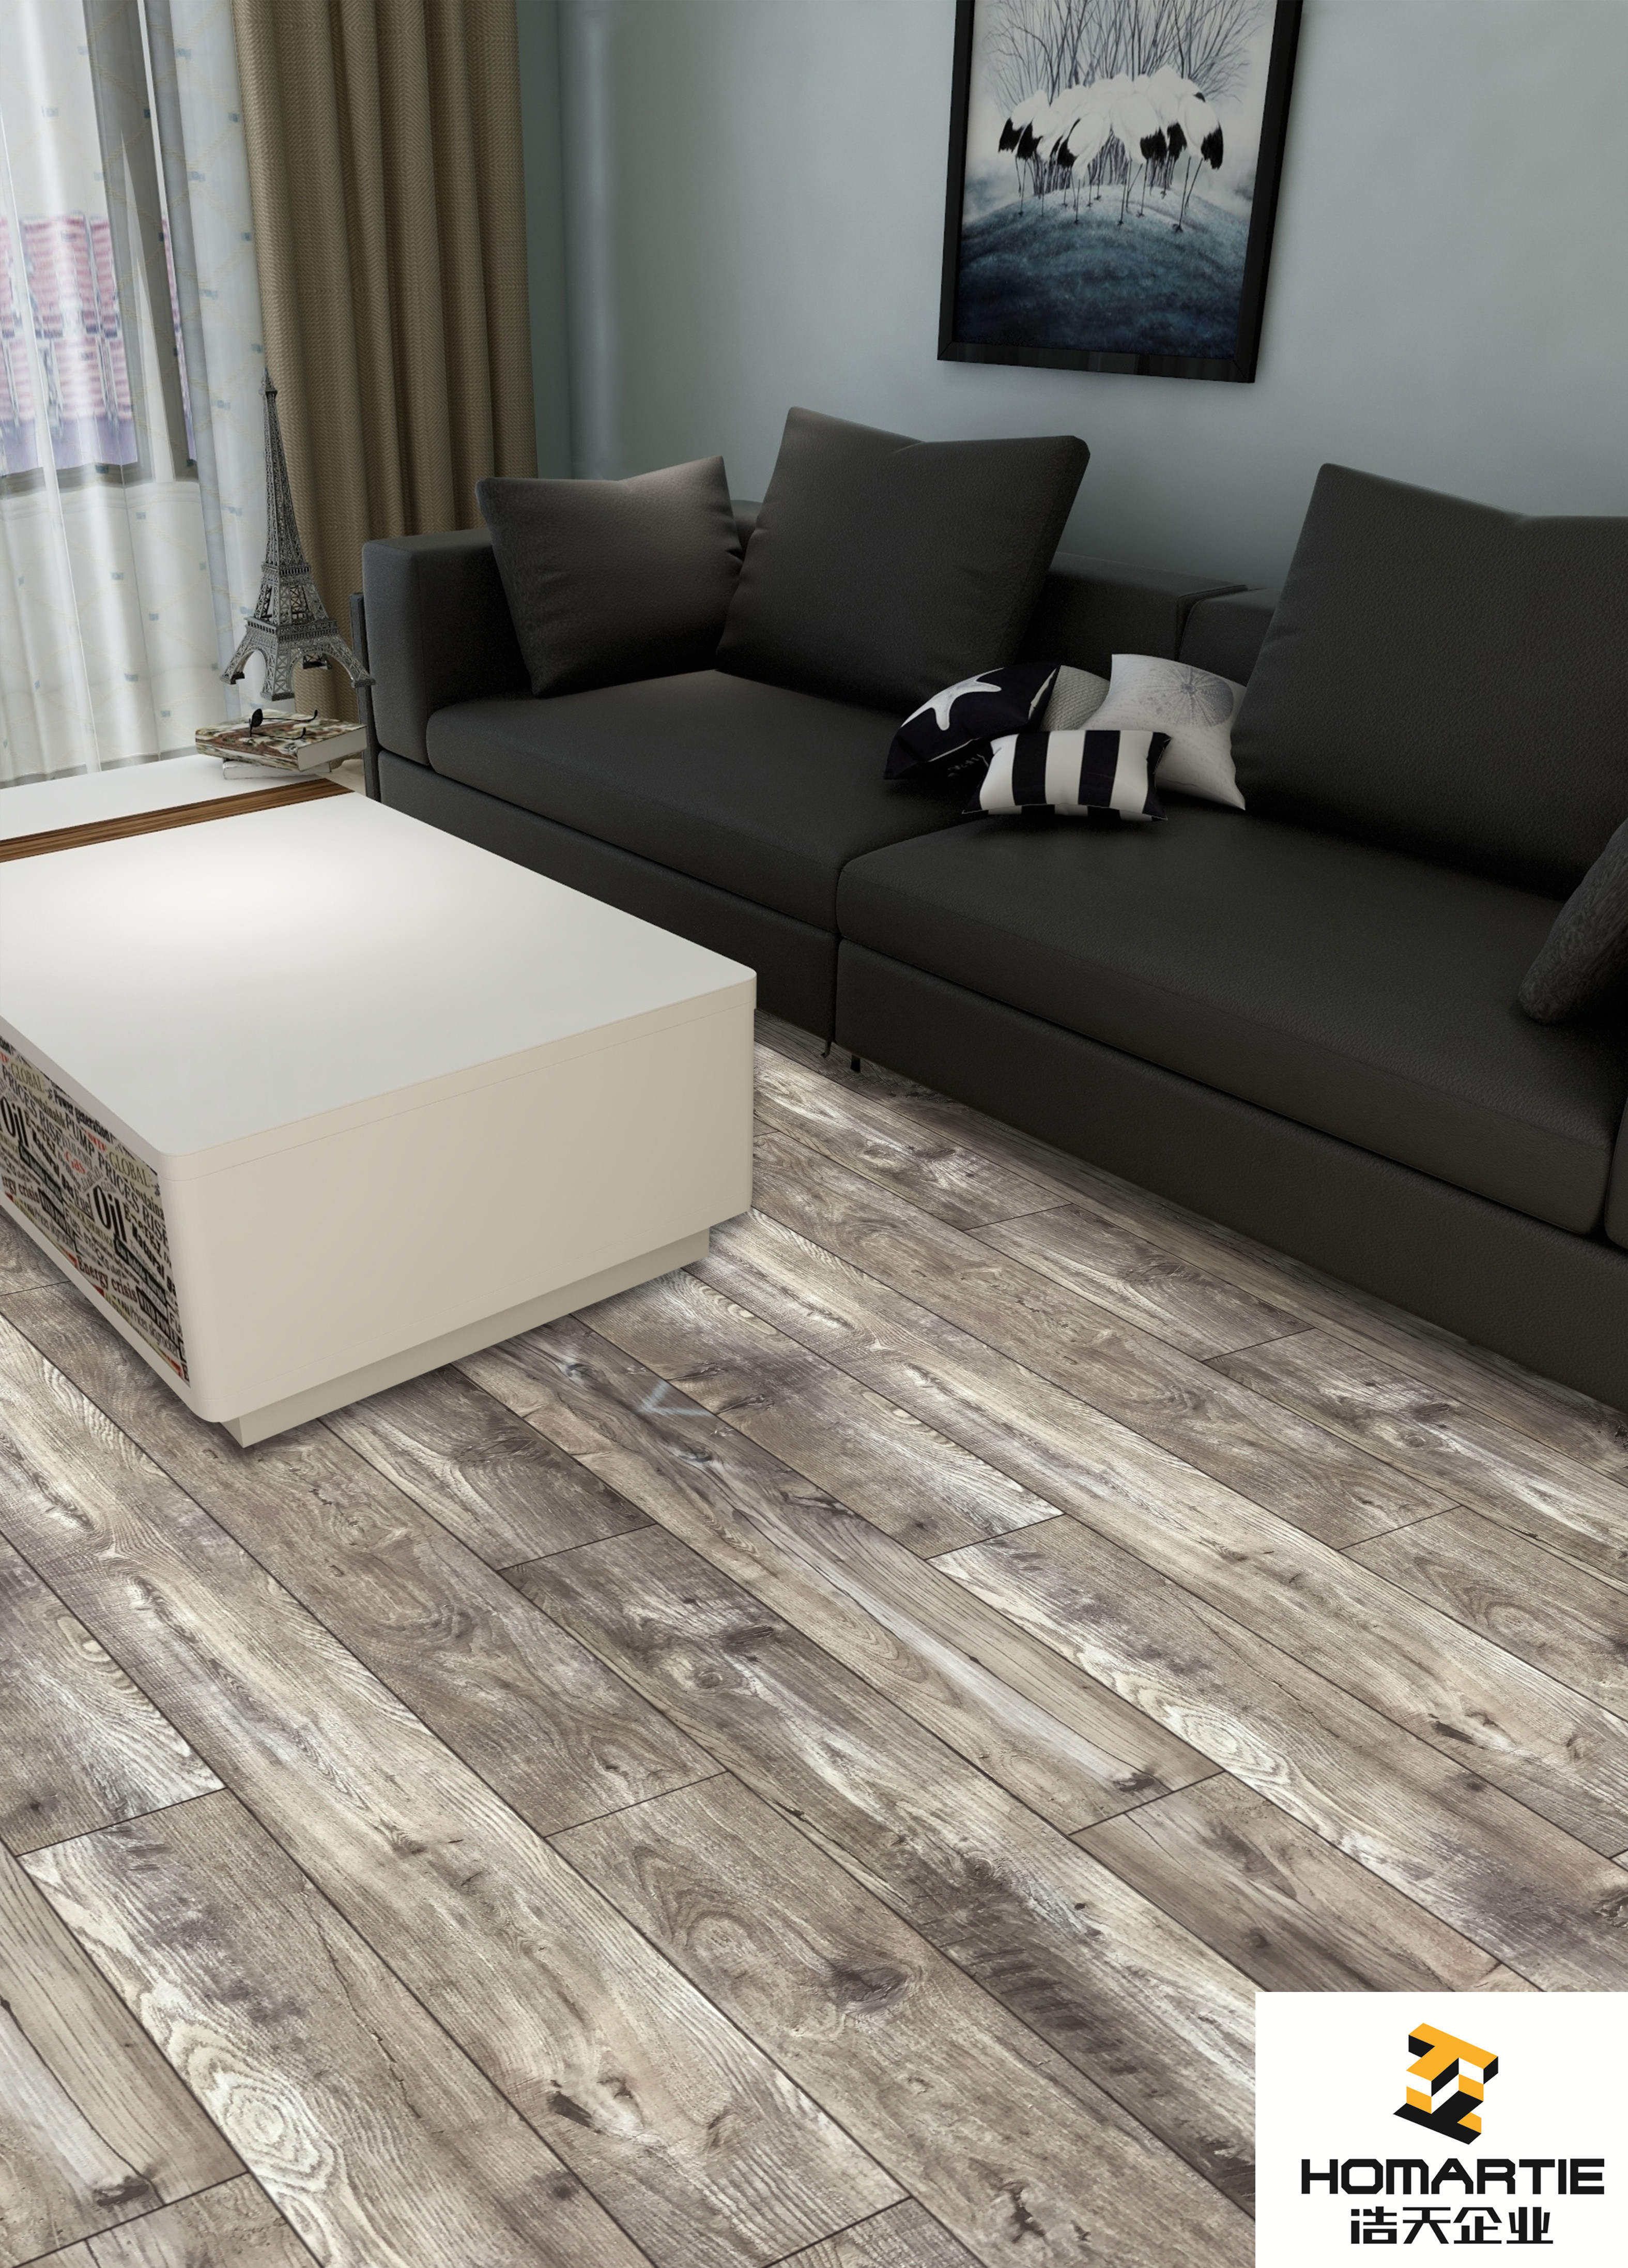  FireProof Strong Stability SPC Vinyl Click Flooring Good Heat Cold Resistance Manufactures